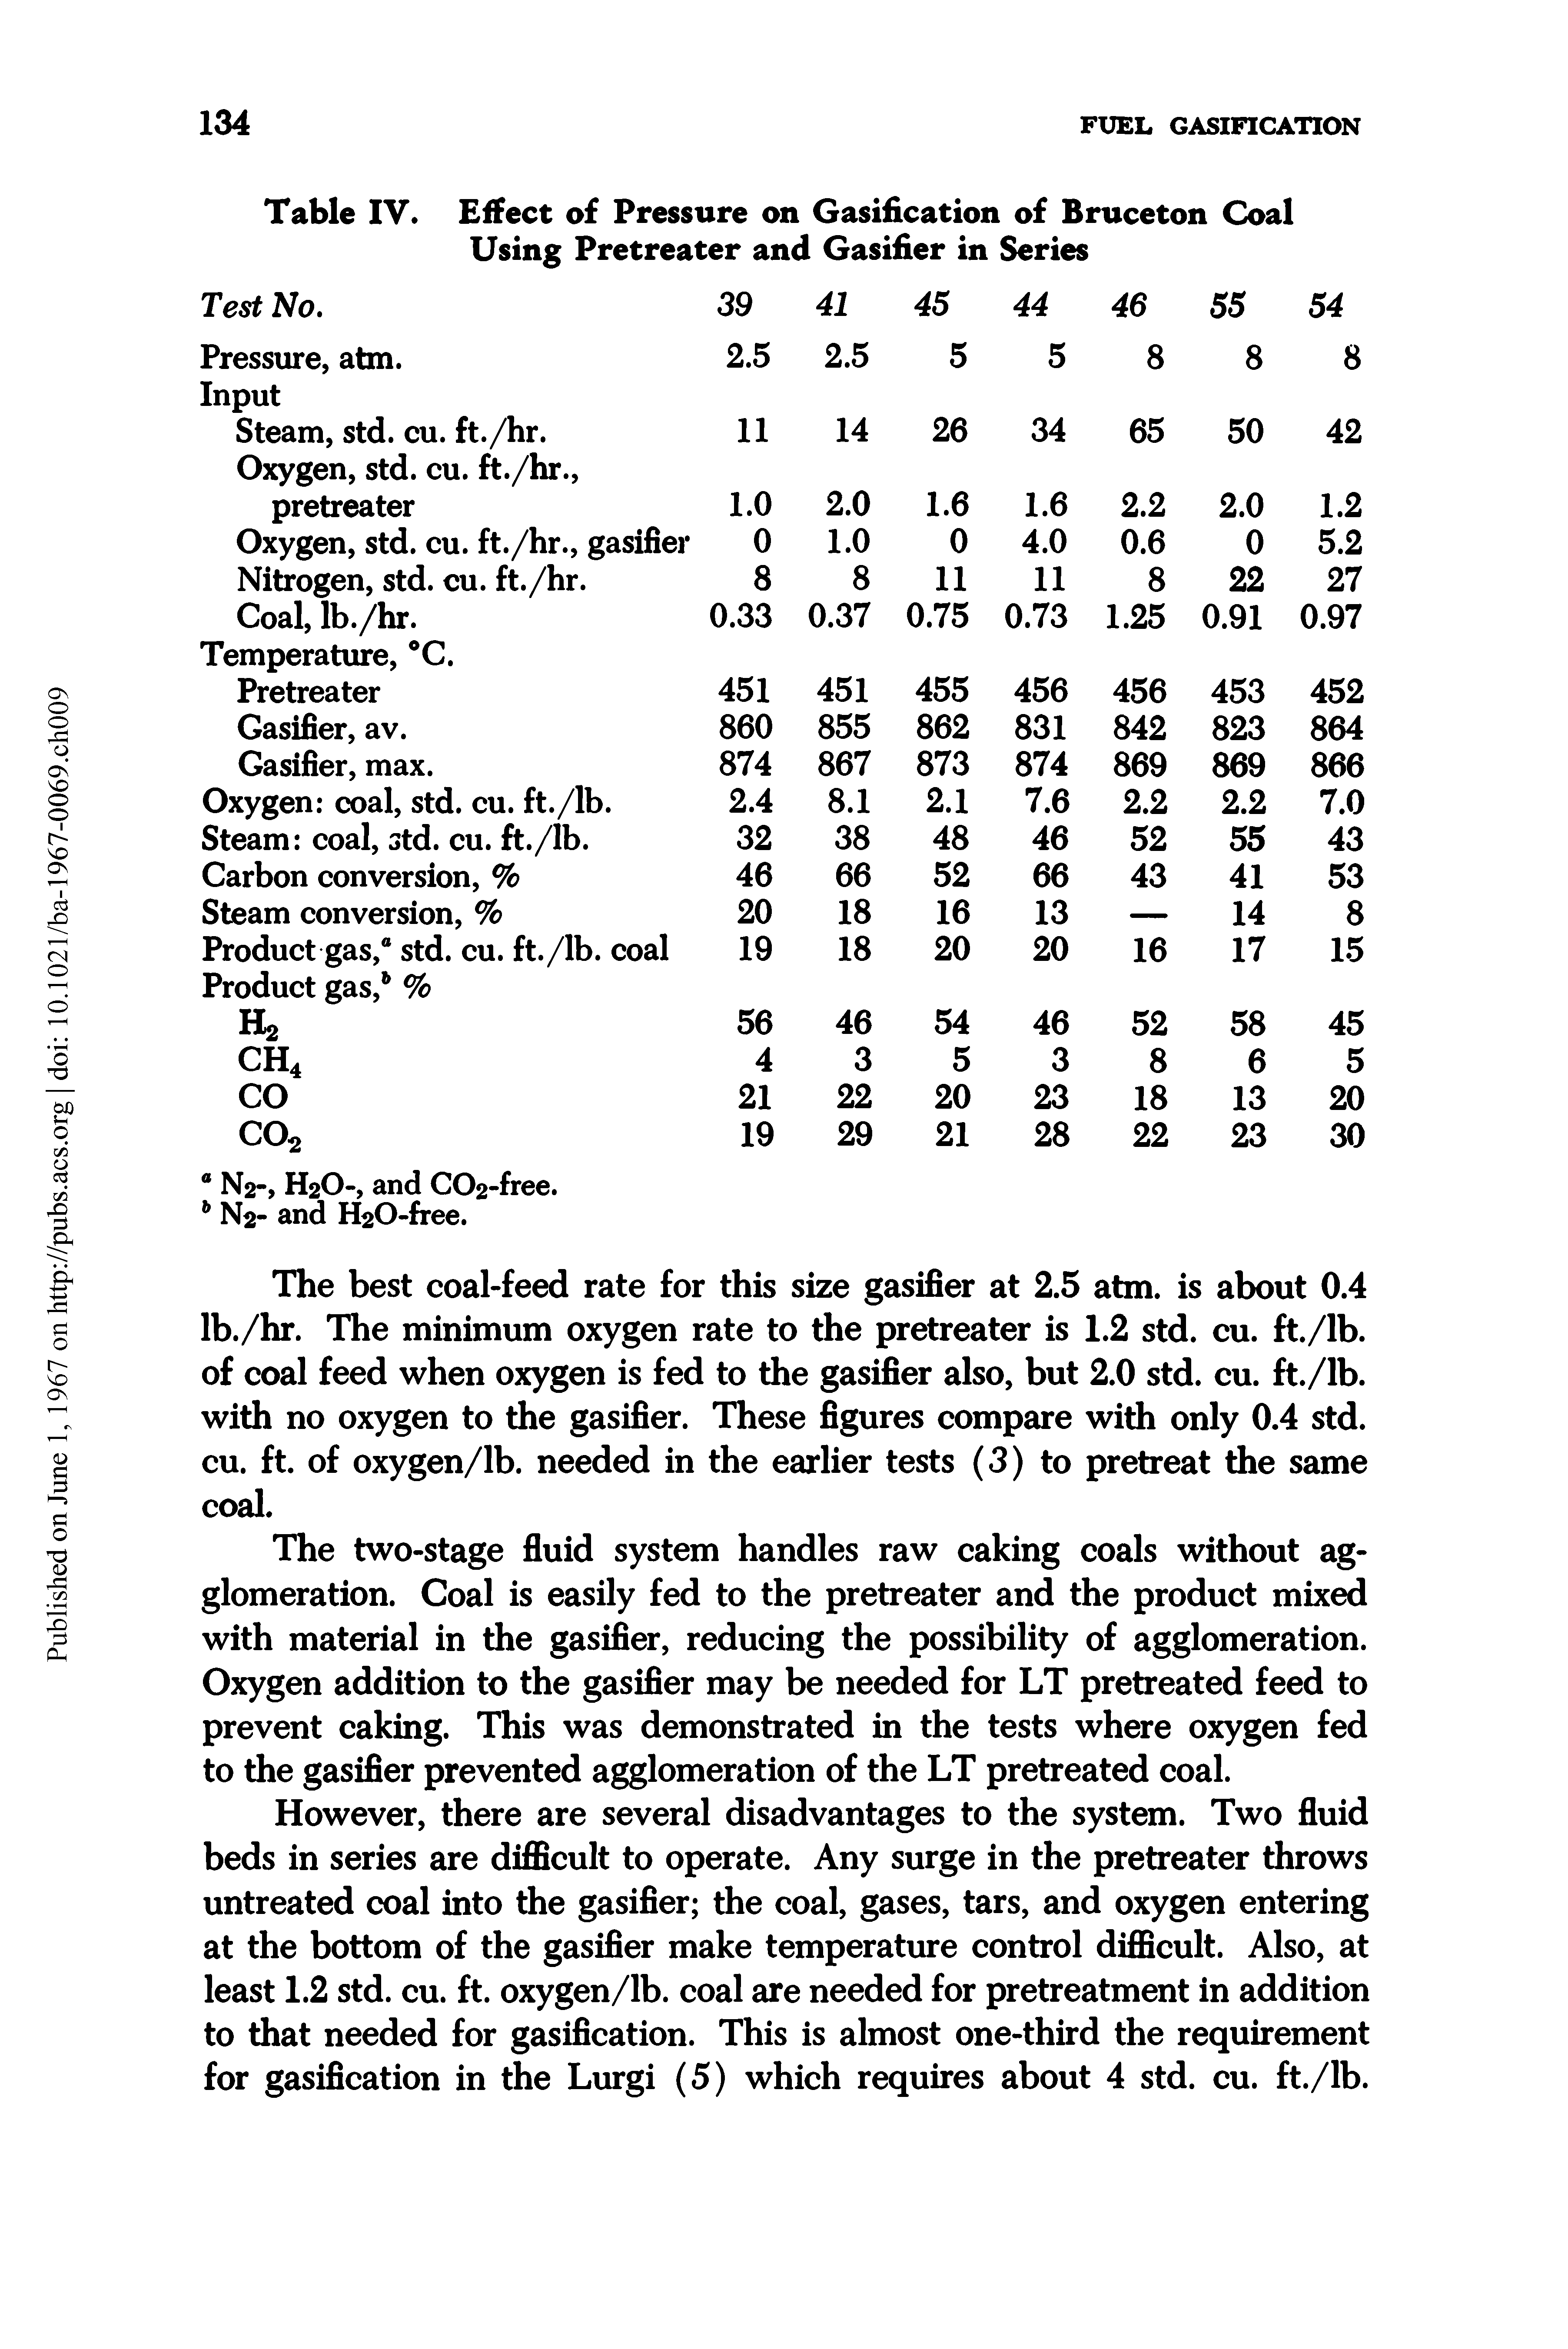 Table IV. Effect of Pressure on Gasification of Bruceton Coal Using Pretreater and Gasifier in Series...